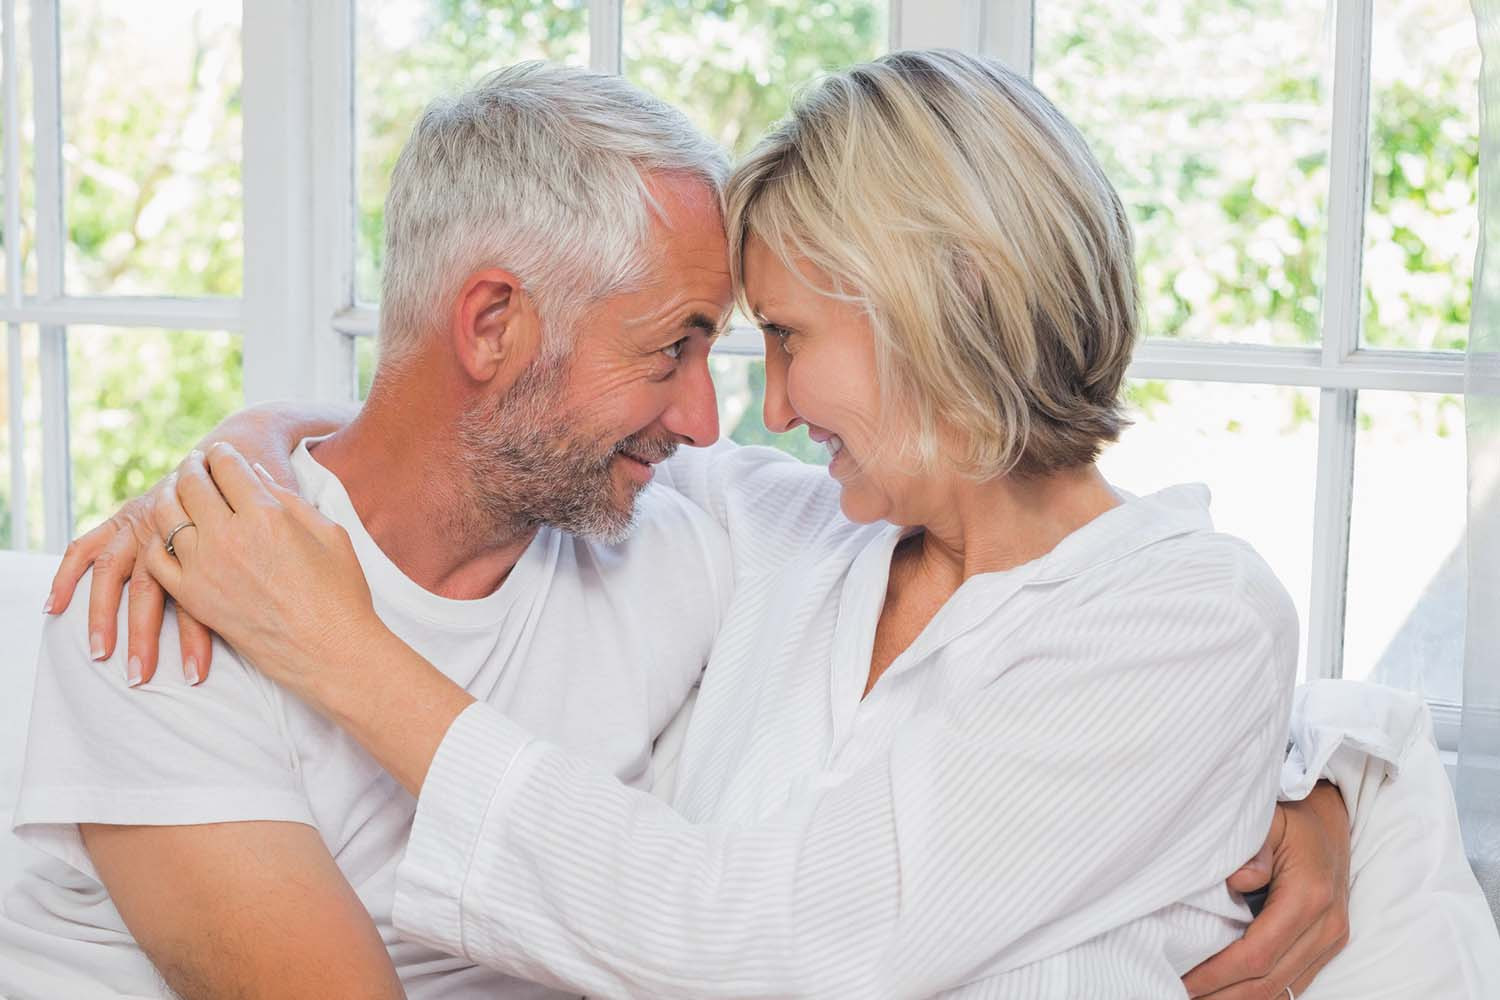 photo of a mature couple embracing and looking at each other, smiling